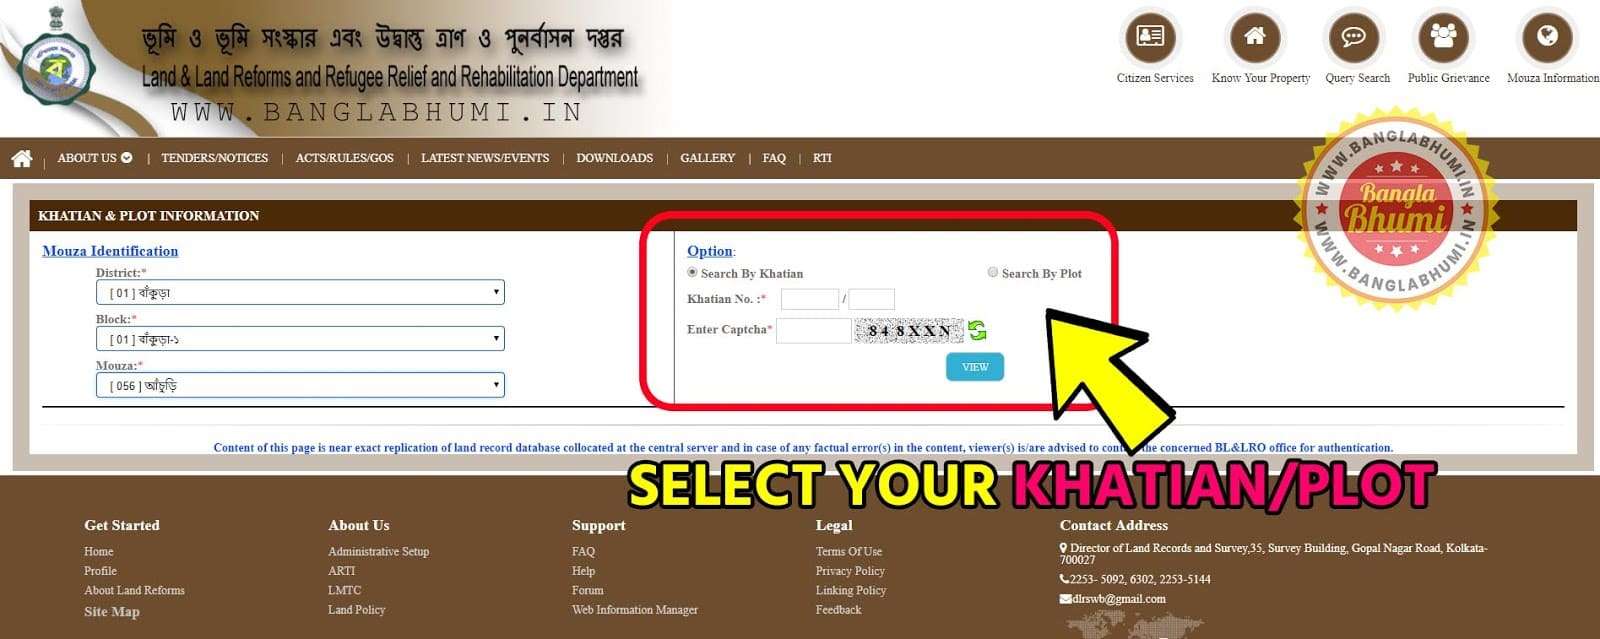 Find West Bengal Land Records With Khatian Number Plot Number -  Step 6